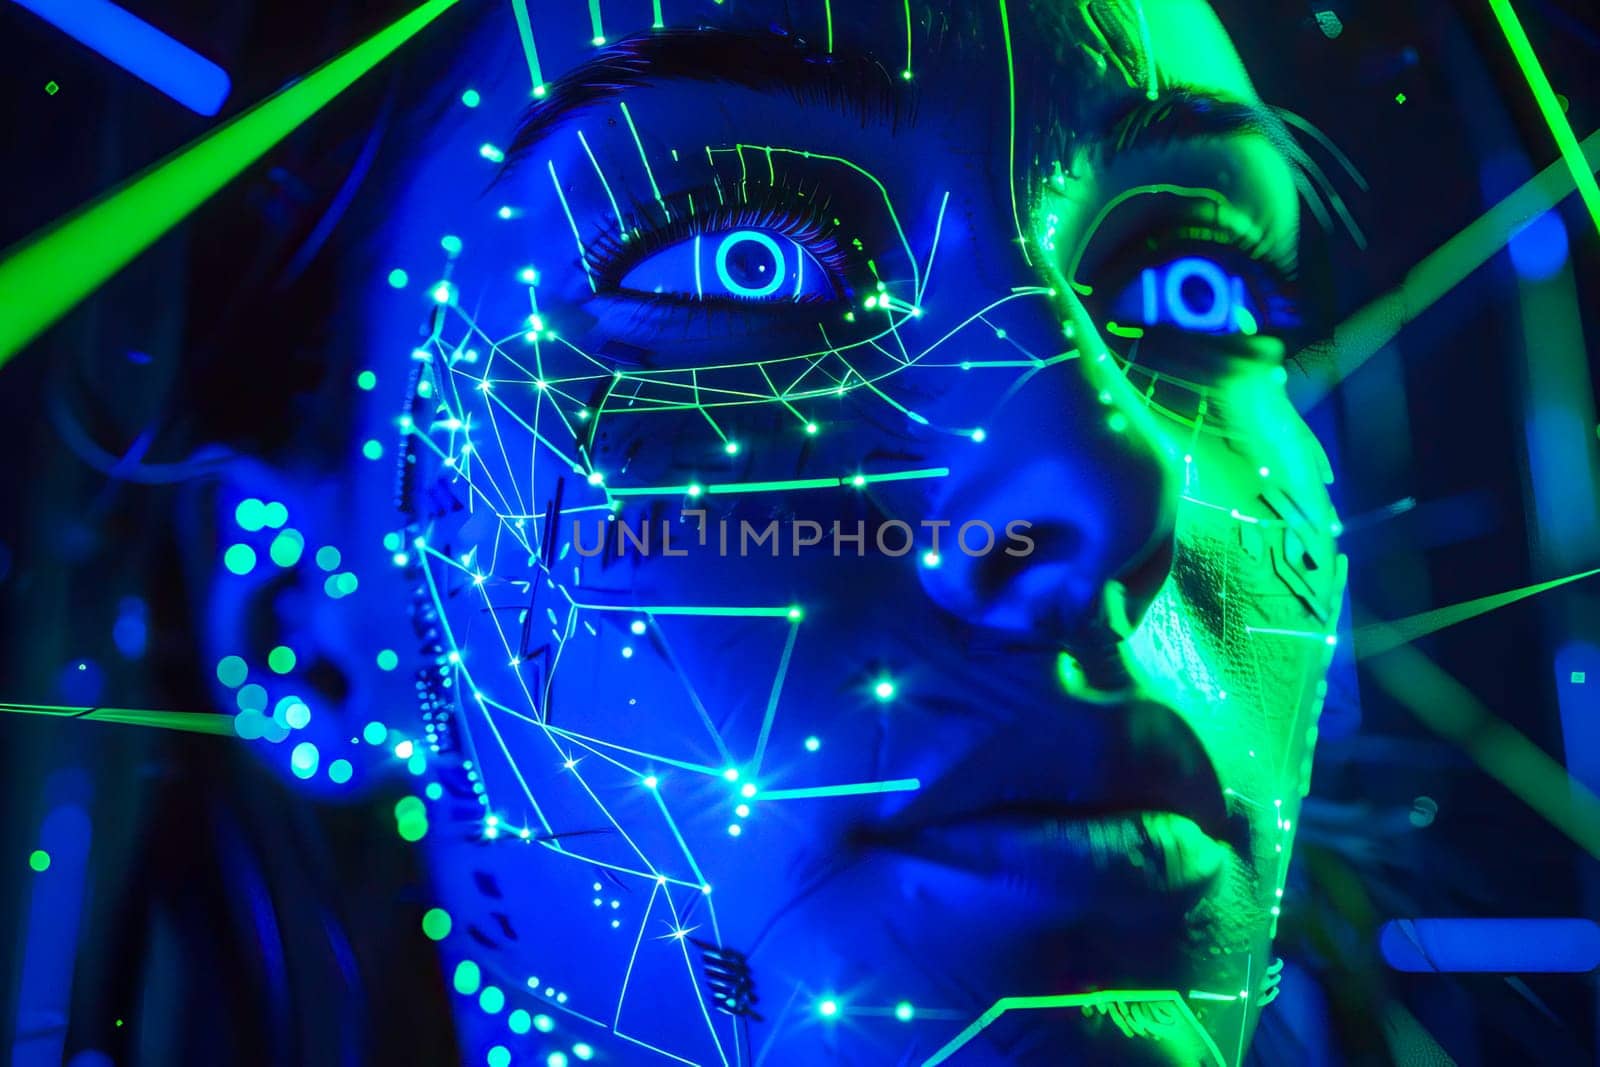 A womans face is highlighted by vibrant neon lights, creating a striking visual contrast. by vladimka